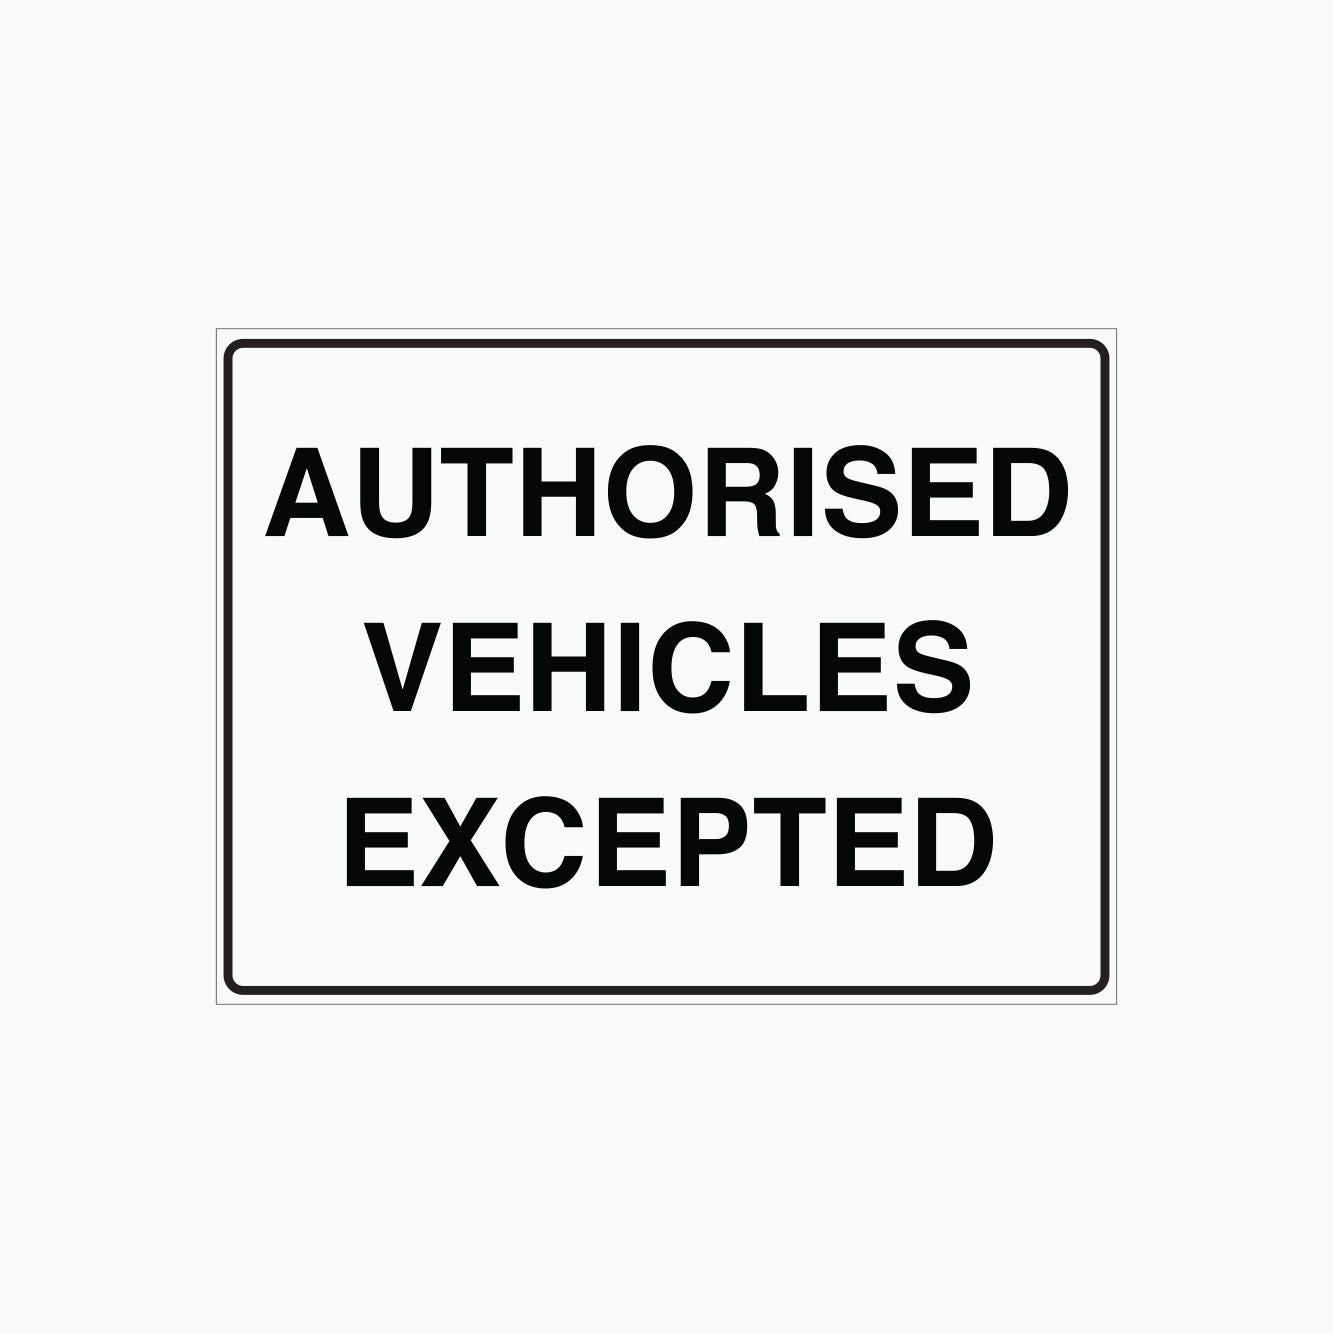 AUTHORISED VEHICLES EXCEPTED SIGN